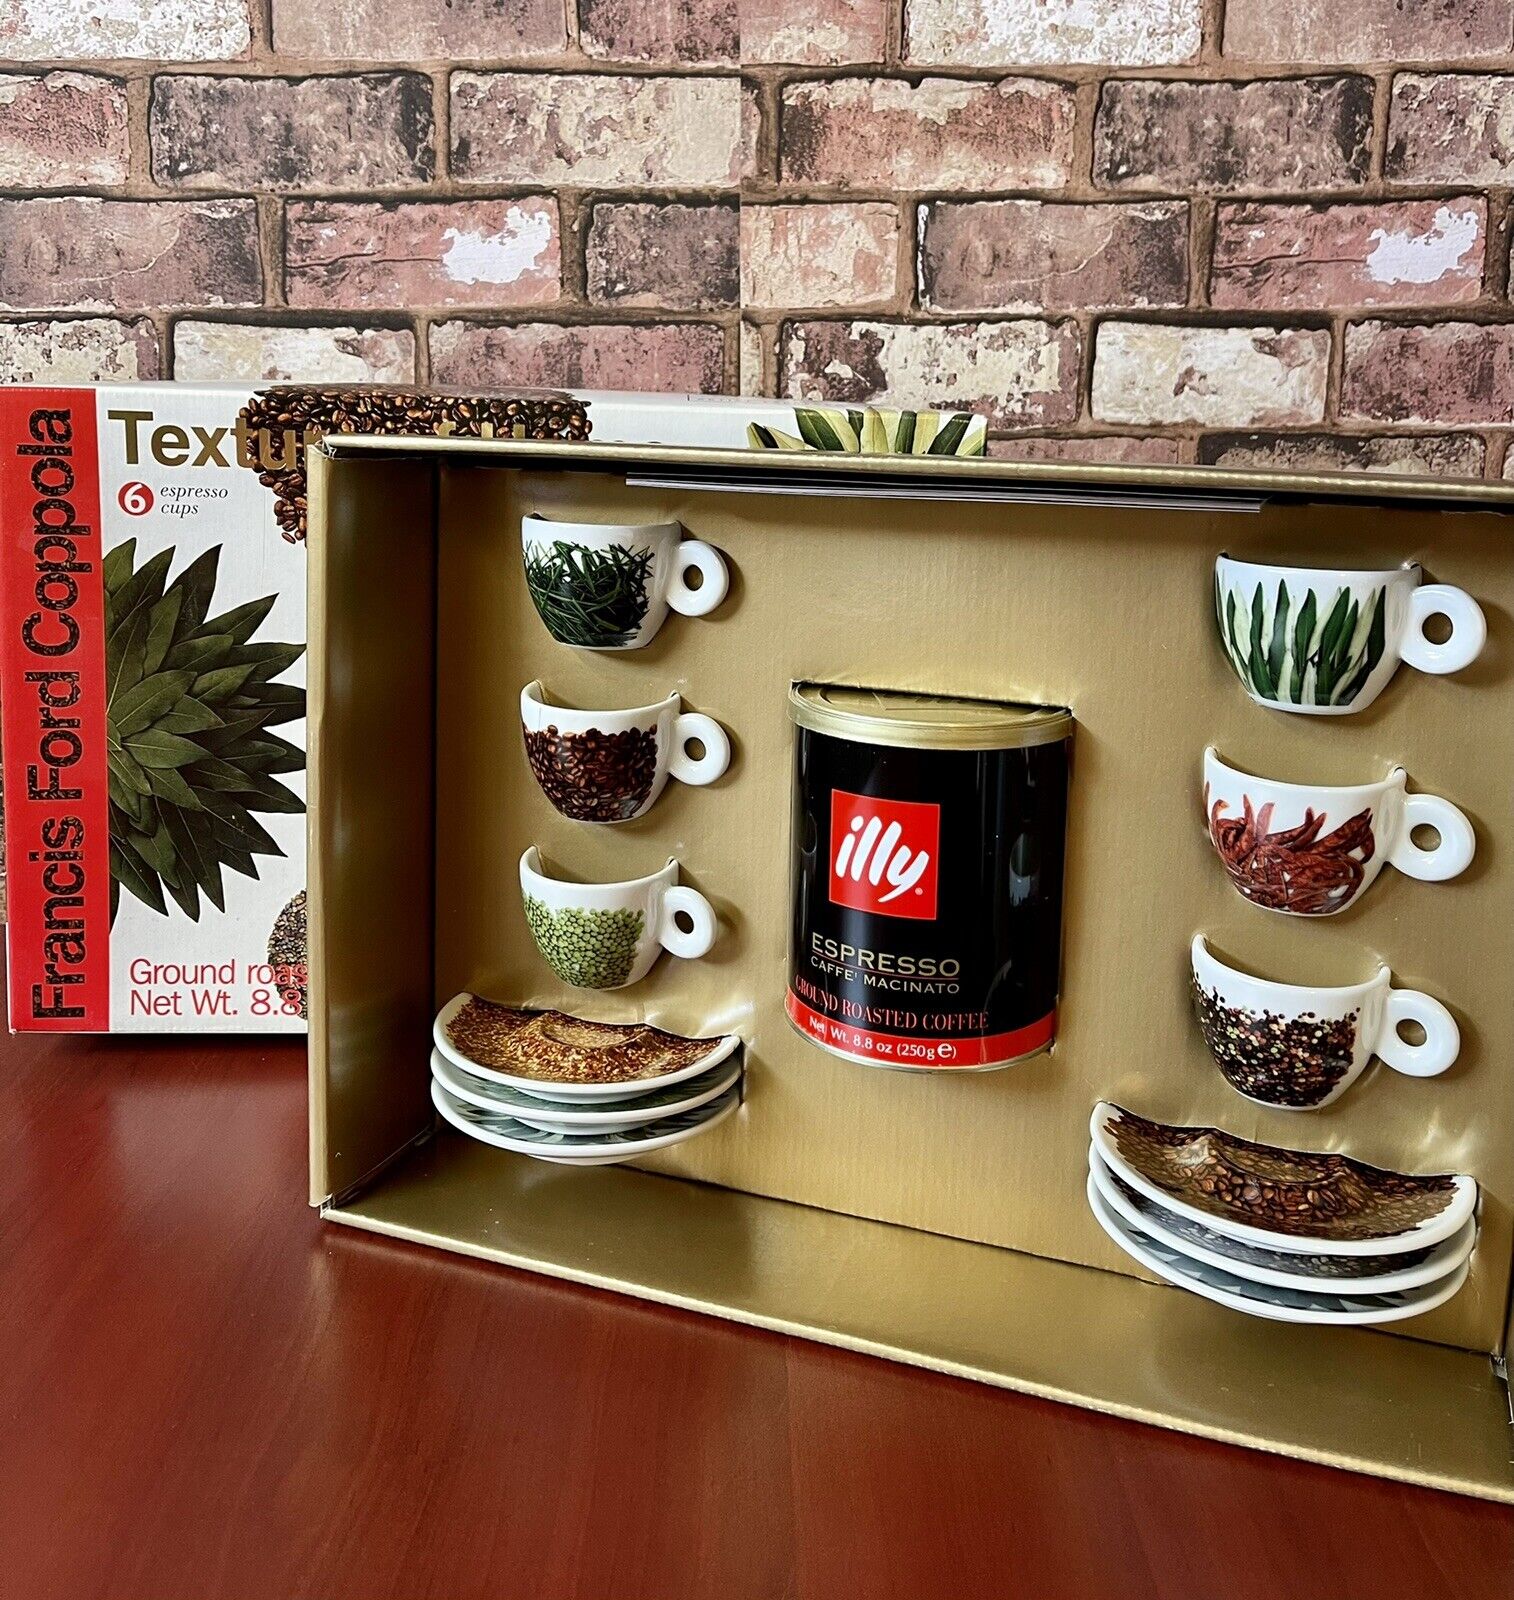 NEW Illy Espresso Collections Cups Francis Ford Coppola Textures of Home 2000